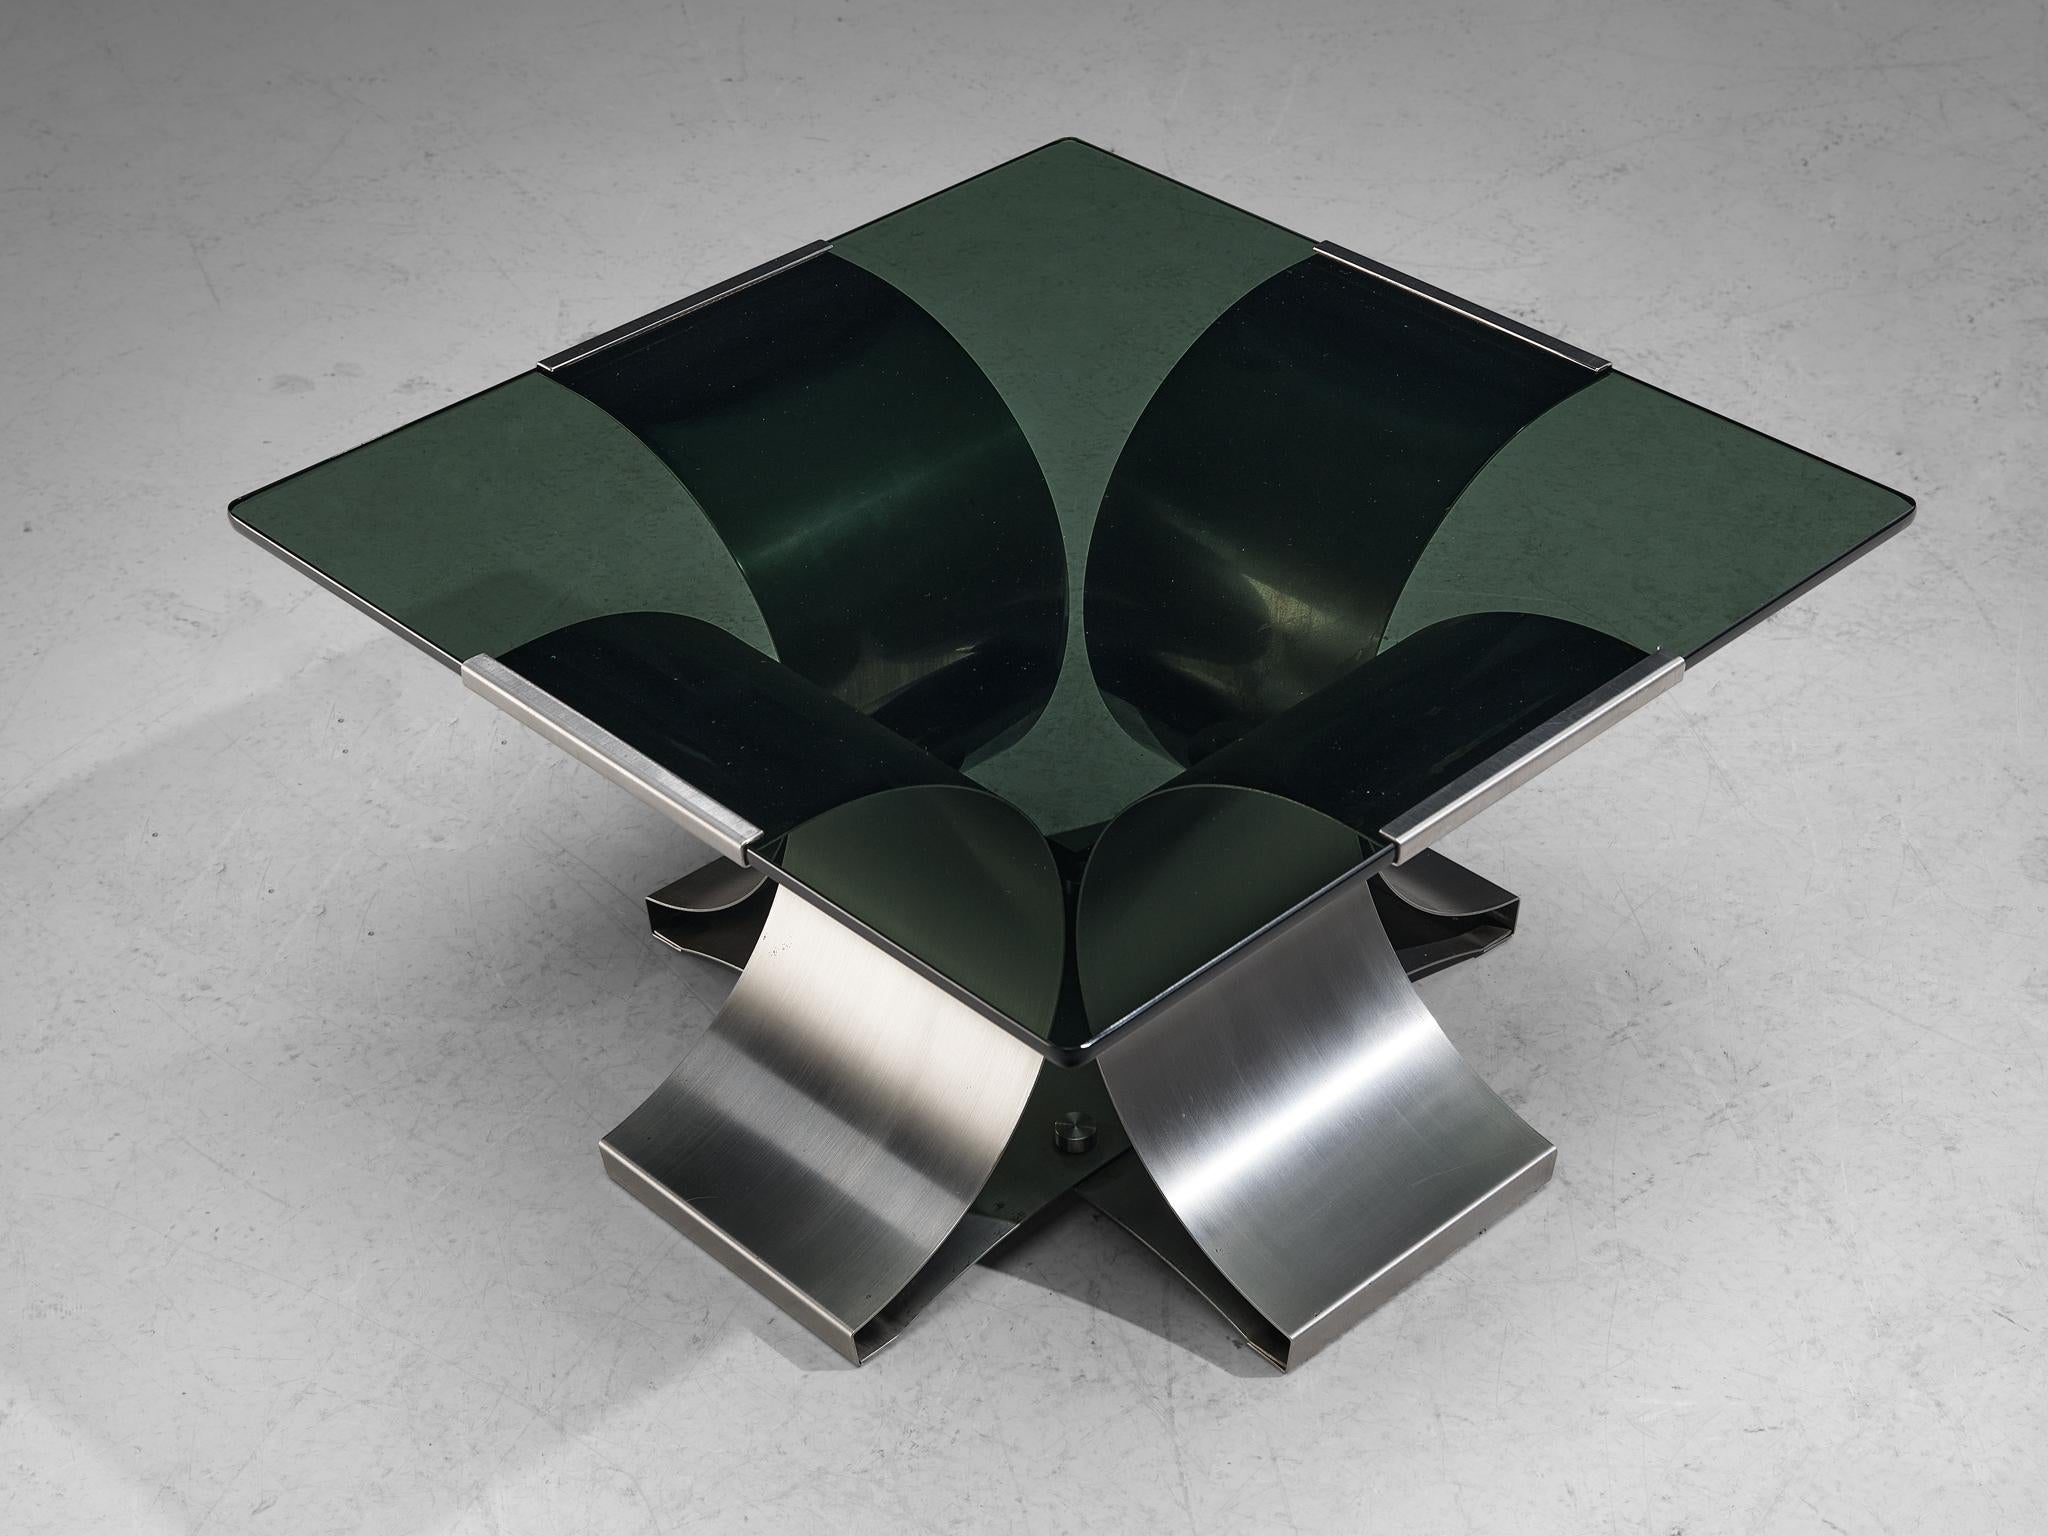 Coffee table, brushed steel, glass, Europe, 1970s

A lovely and sleek square coffee table in a folded flat steel structure with brushed surface and smoked glass table top. The design of this table has a very modern and contemporary feel because of